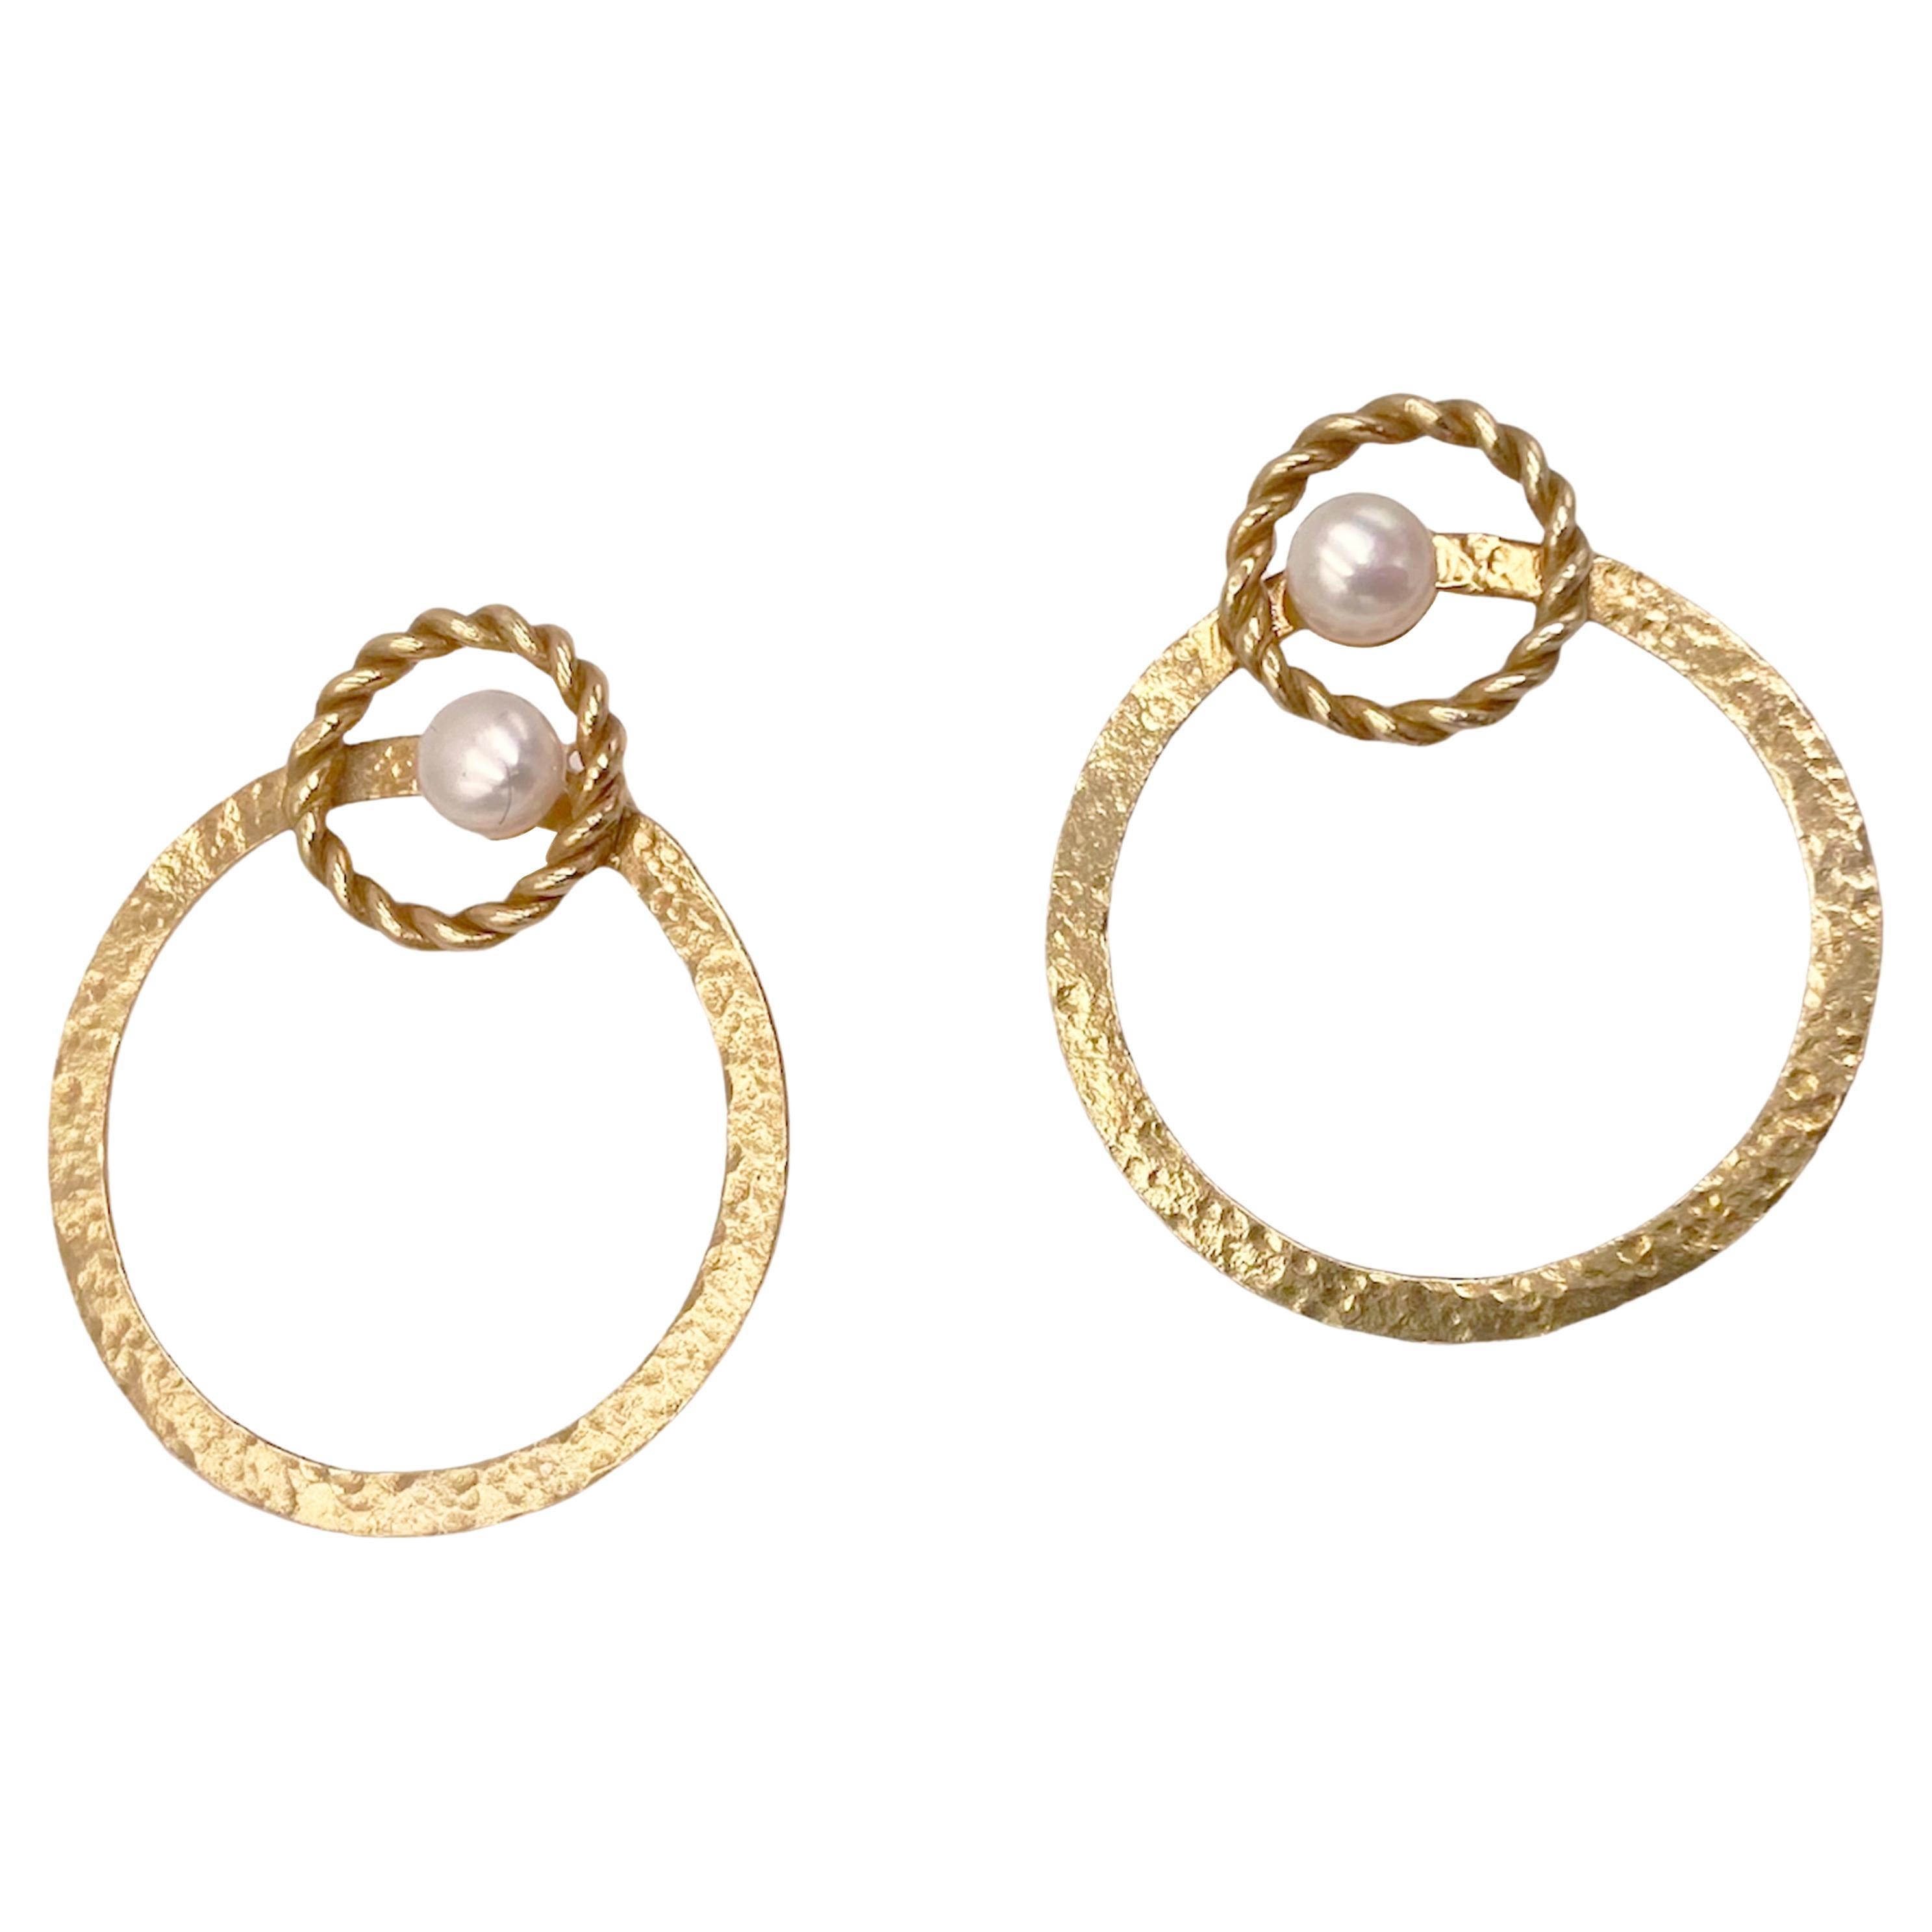 Rossella Ugolini 18K Yellow Gold Hammered Handcrafted Circle Large Hoop Earrings For Sale